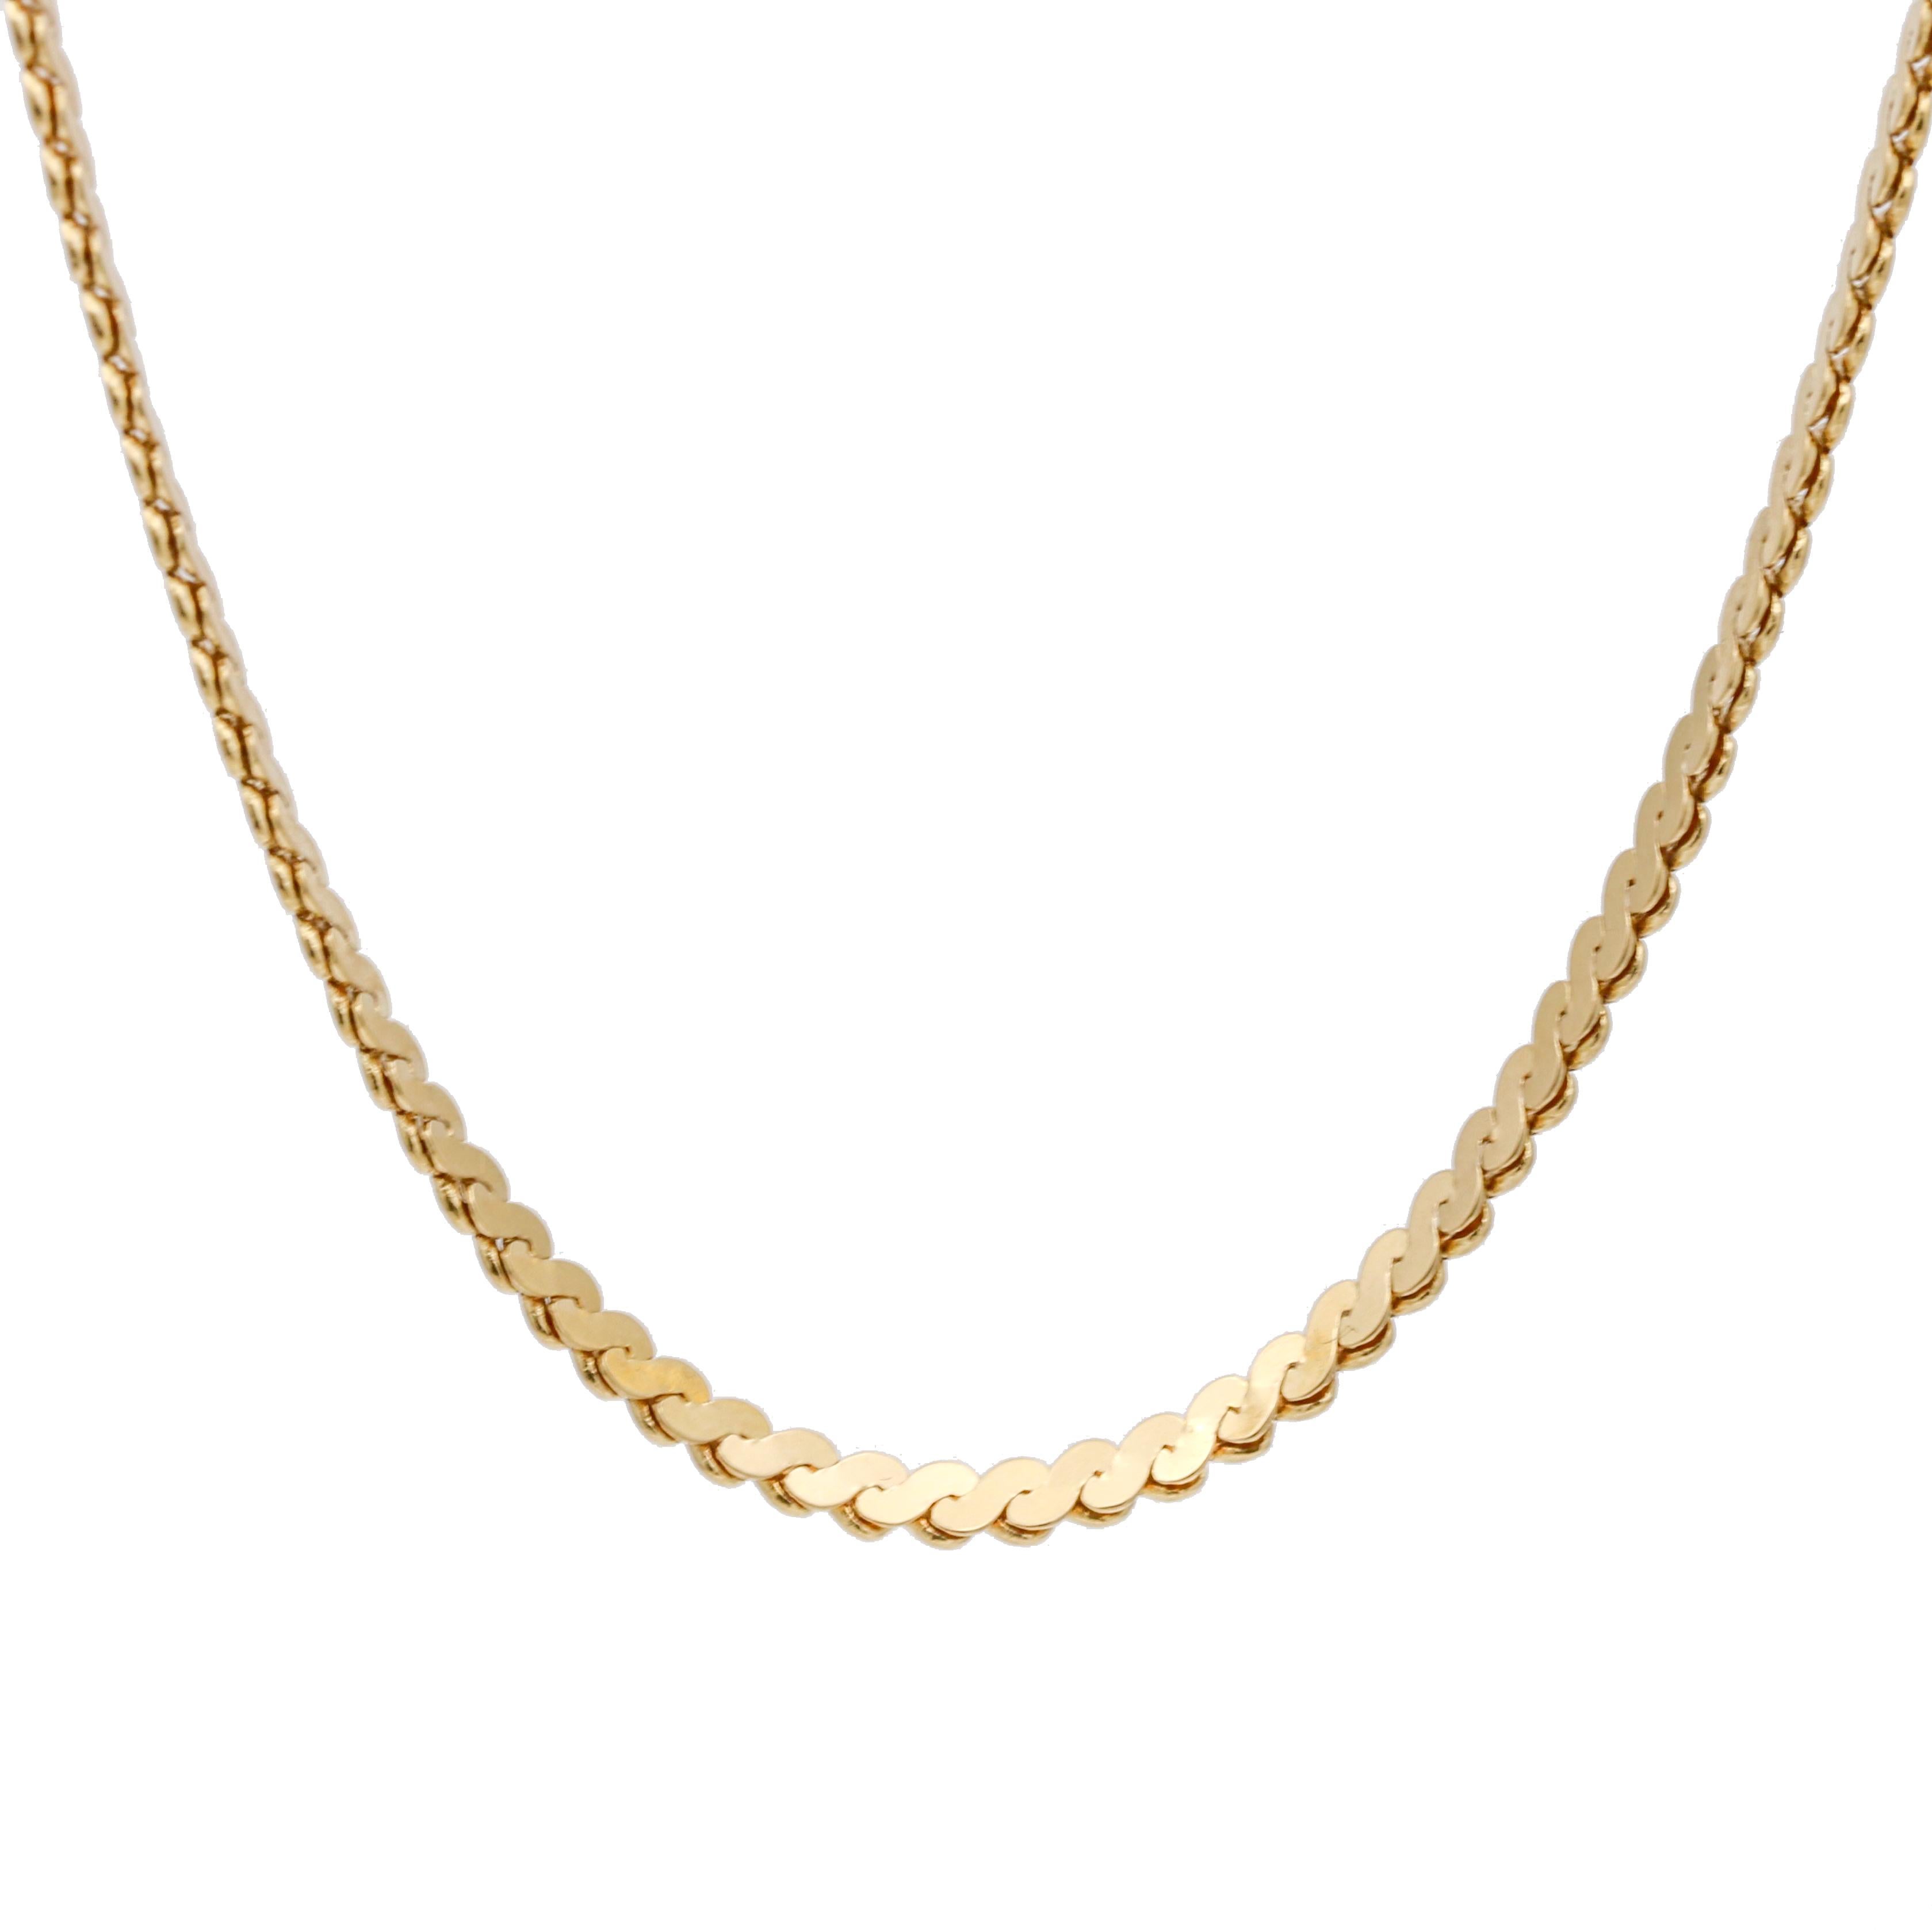 This necklace is made of 18K yellow gold and features a classic serpent link chain design. The chain is 2.5mm wide and weighs 11.80 grams, making it a substantial piece that is not too heavy or too delicate. The necklace is unisex in style and can